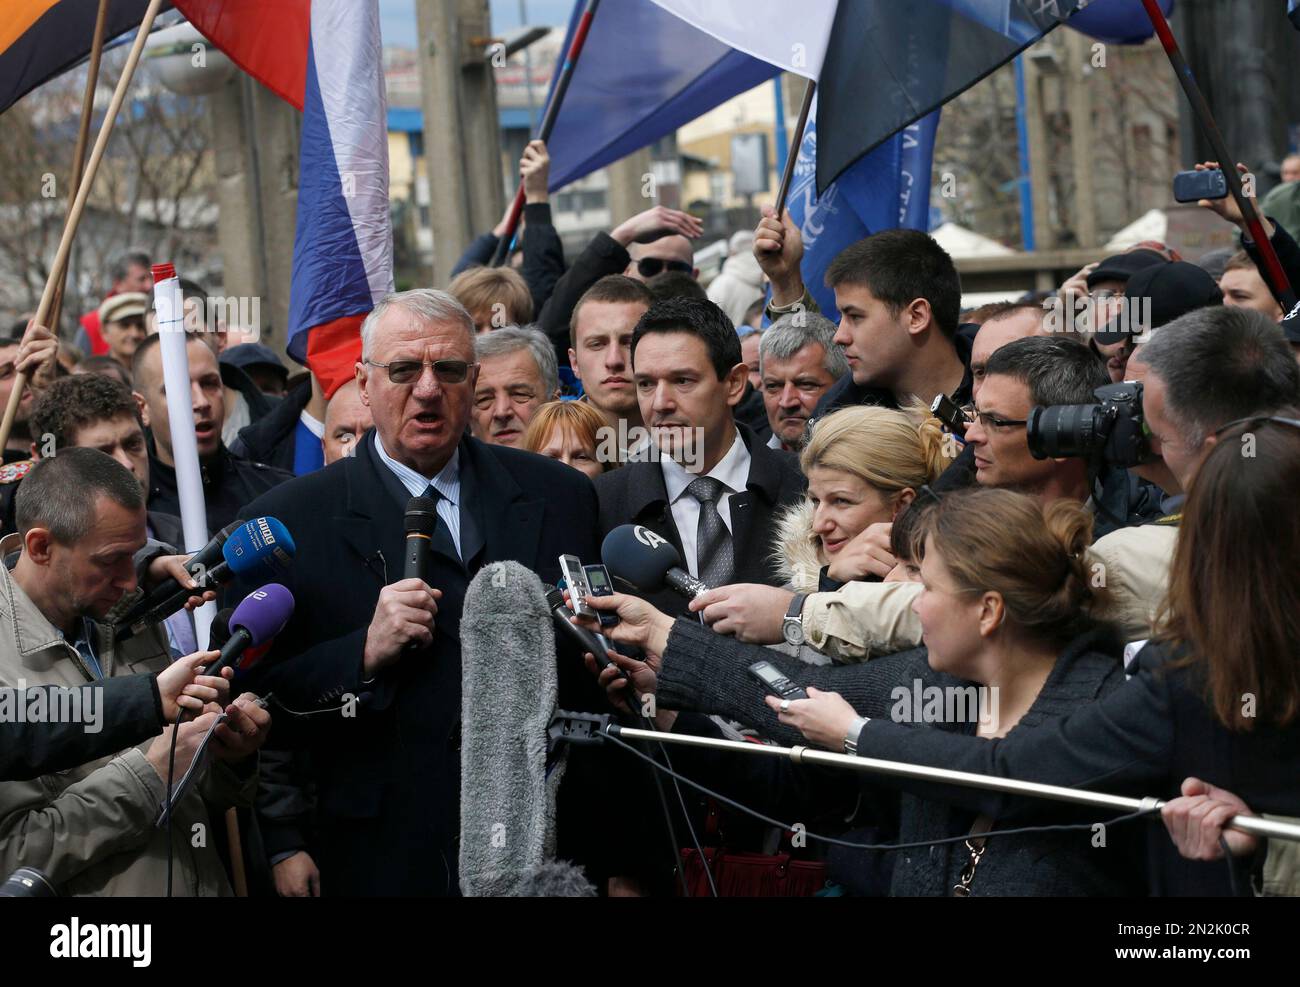 Serbian far right leader Vojislav Seselj, who is accused of war crimes by a U.N. court, addresses the media at a protest in front of the Higher Court in Belgrade, Serbia, Wednesday, April 1, 2015. Serbia's Foreign Minister Ivica Dacic on Tuesday denounced a Hague Tribunal ruling that far-right leader Vojislav Seselj must return to the court's prison. (AP Photo/Darko Vojinovic) Stock Photo